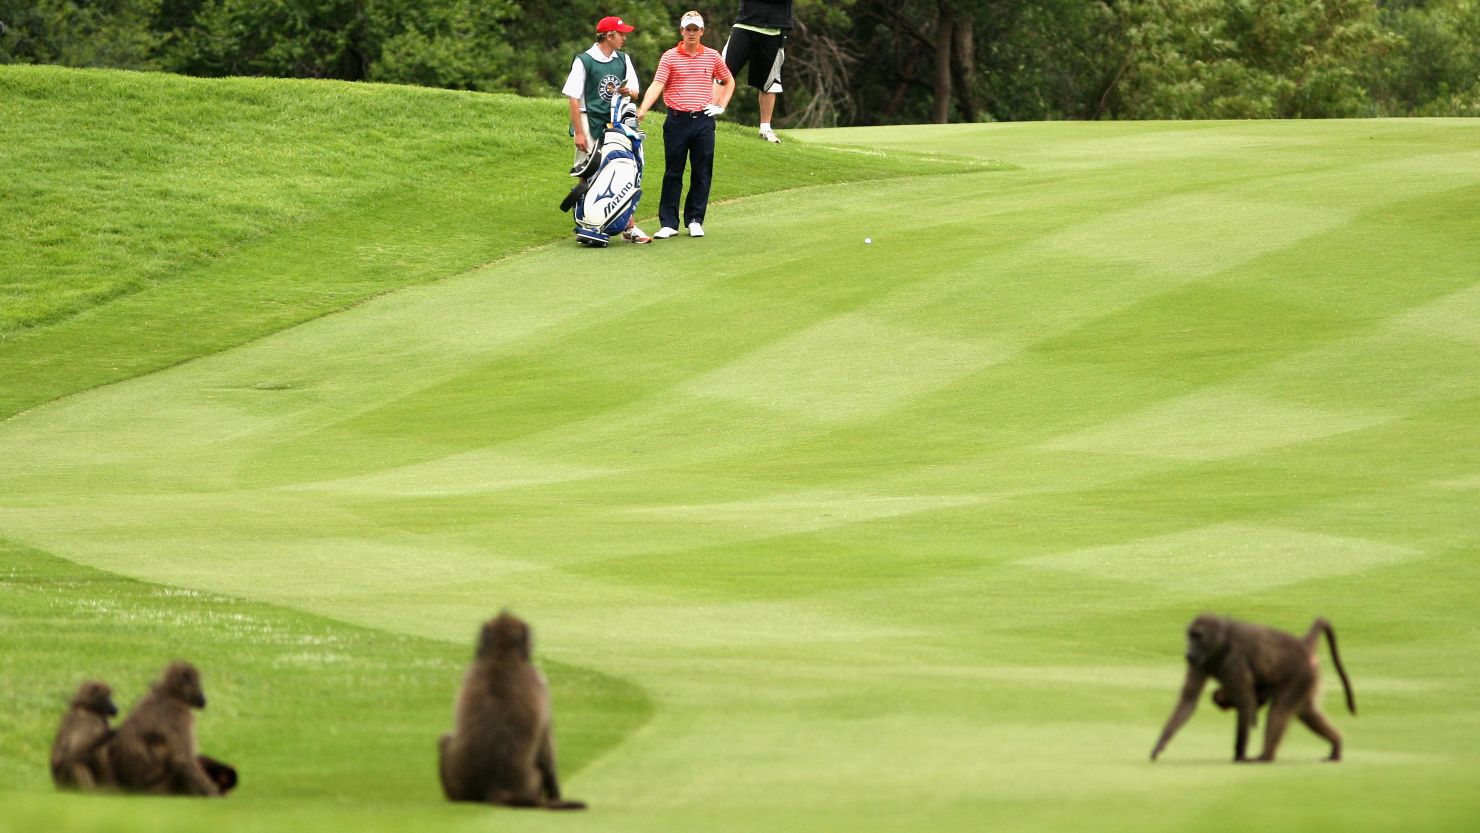 Luke Donald has had to cope with baboons on the course before at the Sun City event.